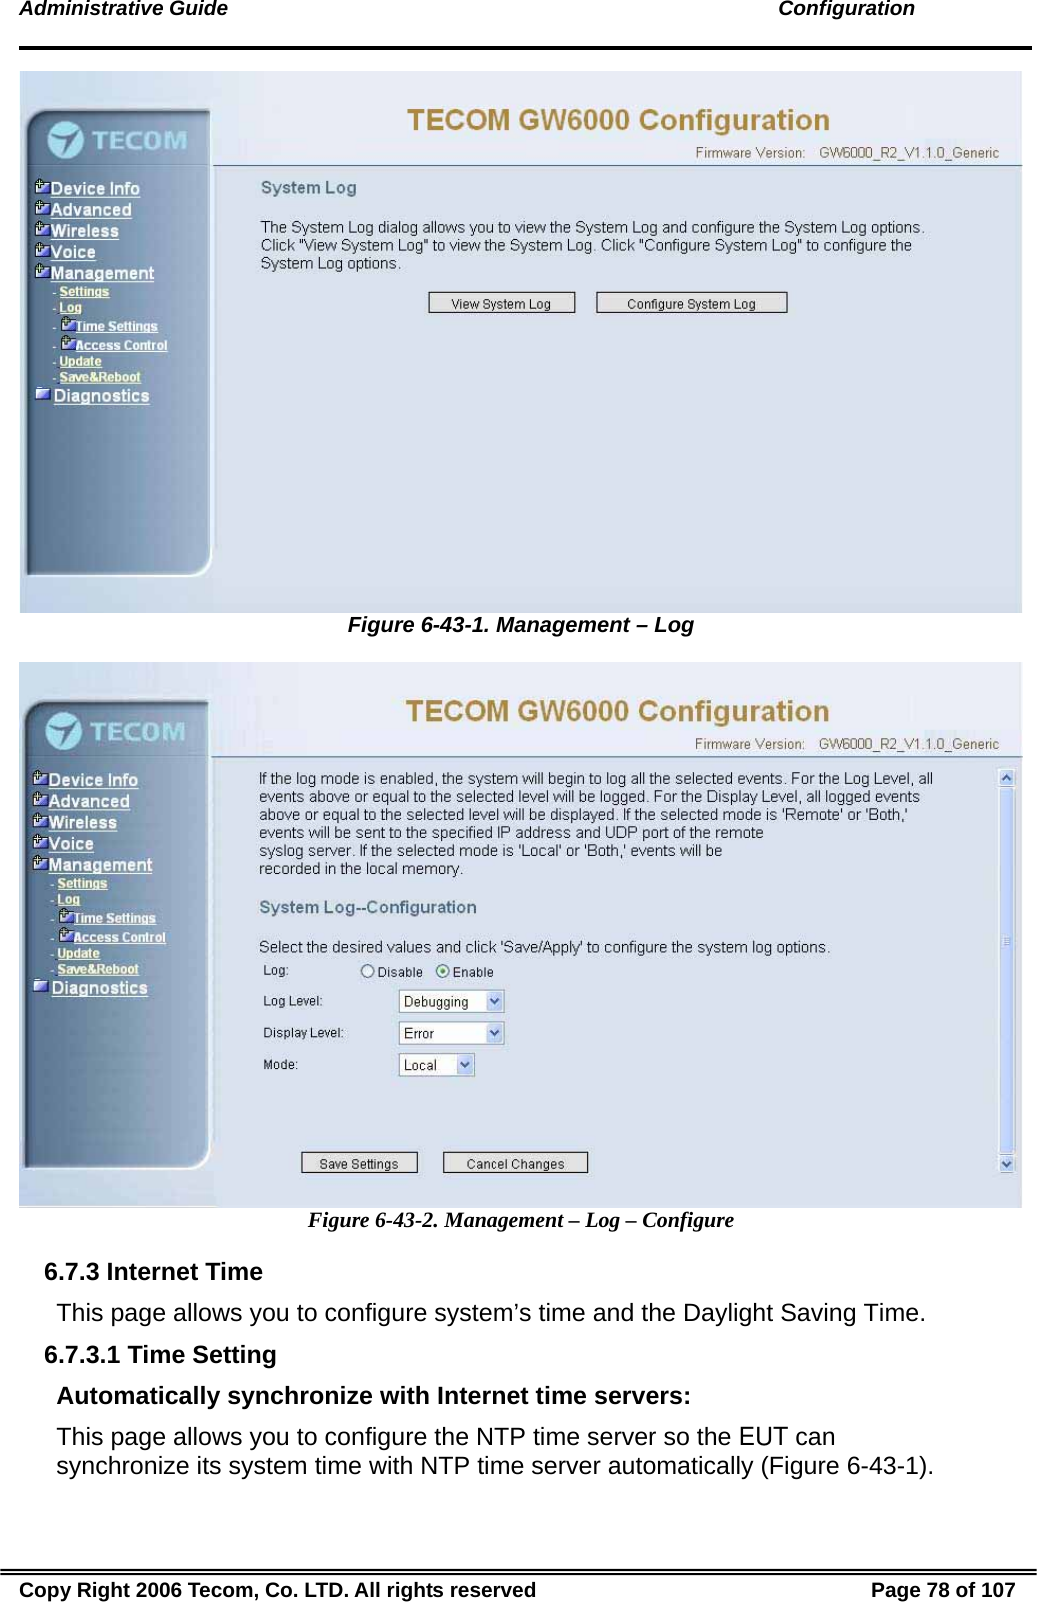 Administrative Guide                                                                                               Configuration  Figure 6-43-1. Management – Log   Figure 6-43-2. Management – Log – Configure 6.7.3 Internet Time This page allows you to configure system’s time and the Daylight Saving Time.  6.7.3.1 Time Setting Automatically synchronize with Internet time servers: This page allows you to configure the NTP time server so the EUT can synchronize its system time with NTP time server automatically (Figure 6-43-1).  Copy Right 2006 Tecom, Co. LTD. All rights reserved  Page 78 of 107 